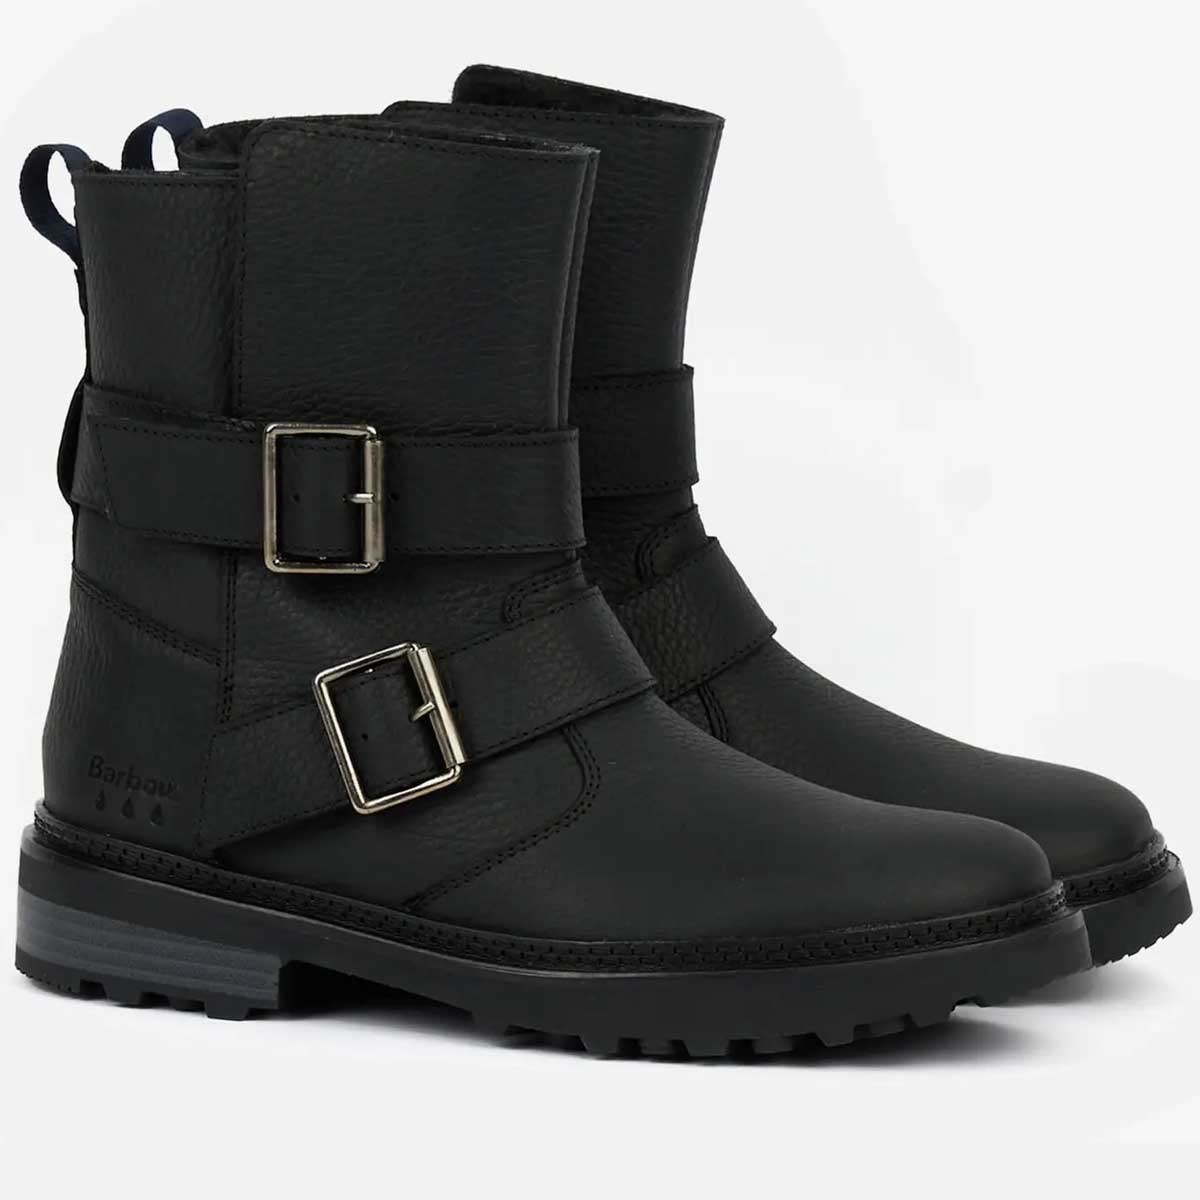 60% OFF BARBOUR Spear Fur Lined Boots - Ladies - Black - Size: UK 5 (NO BOX)